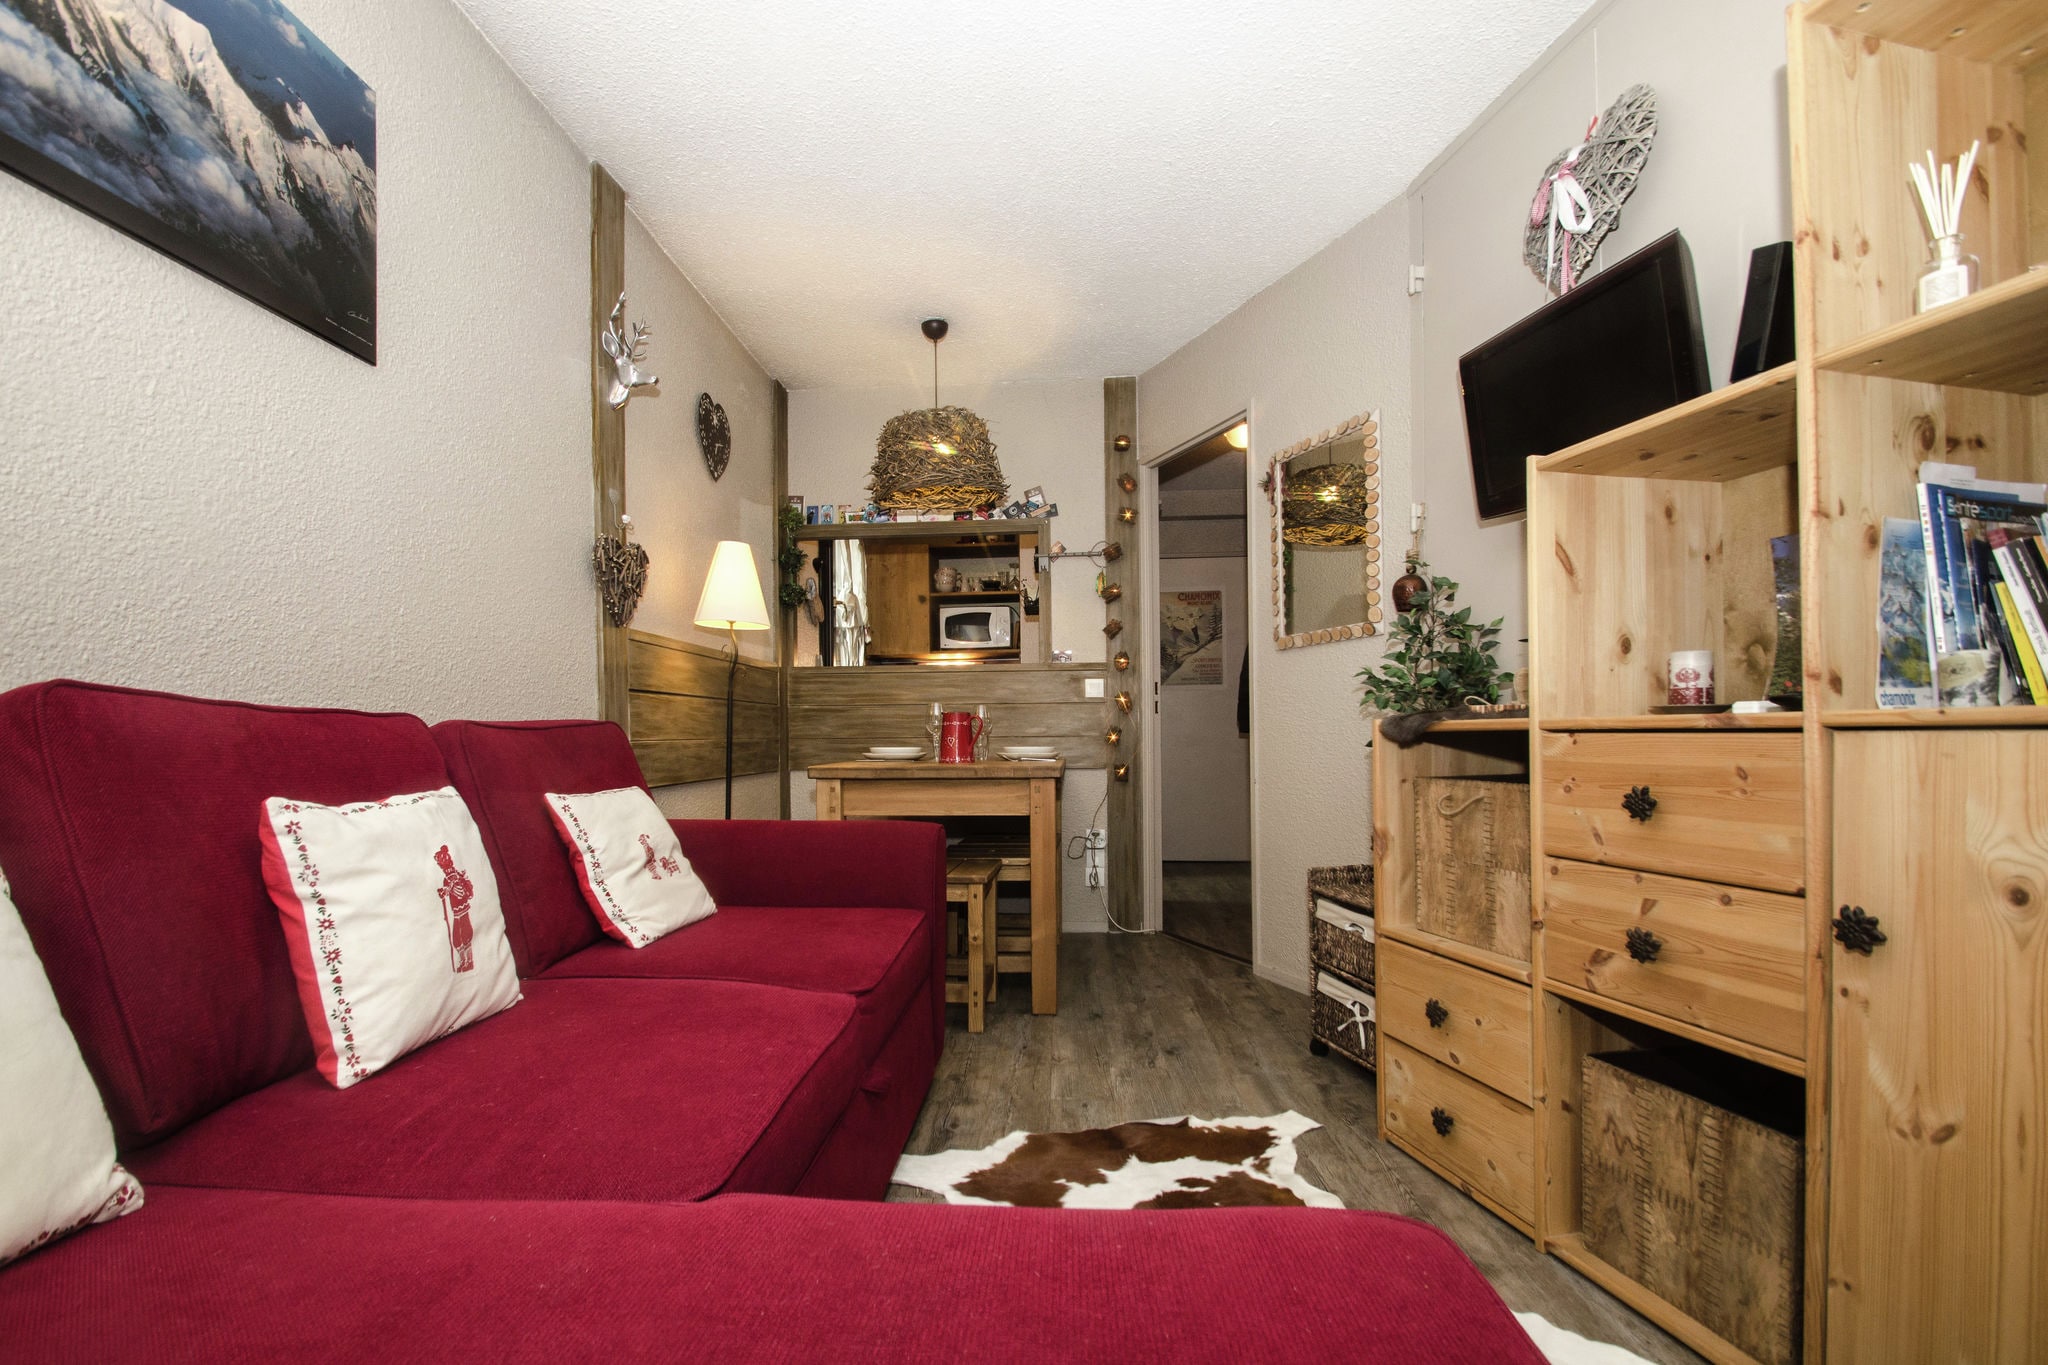 Beautiful apartment decorated with great care in a mountain style